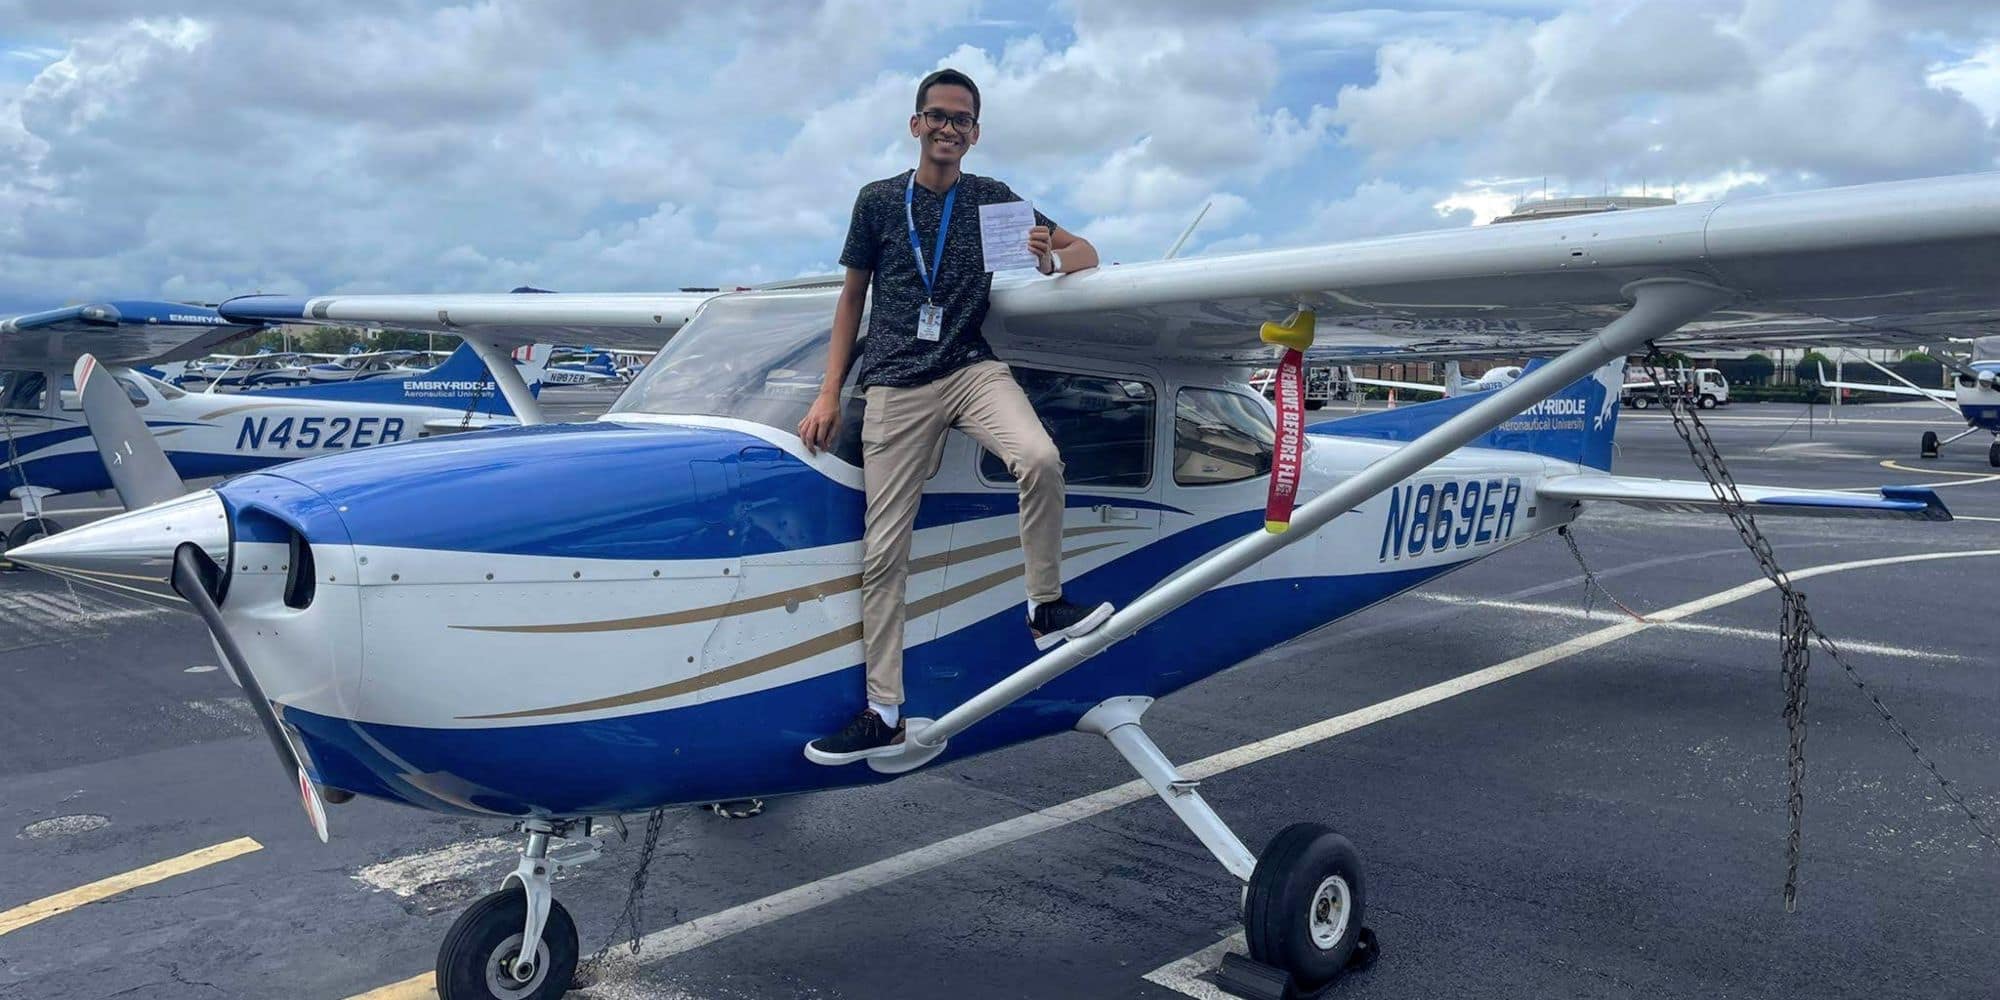 Standing on the strut of an Embry-Riddle Cessna 172, Dylan Kowlessar shows off his instrument rating. (Photo: Embry-Riddle / Daytona Beach Campus Flight Department)